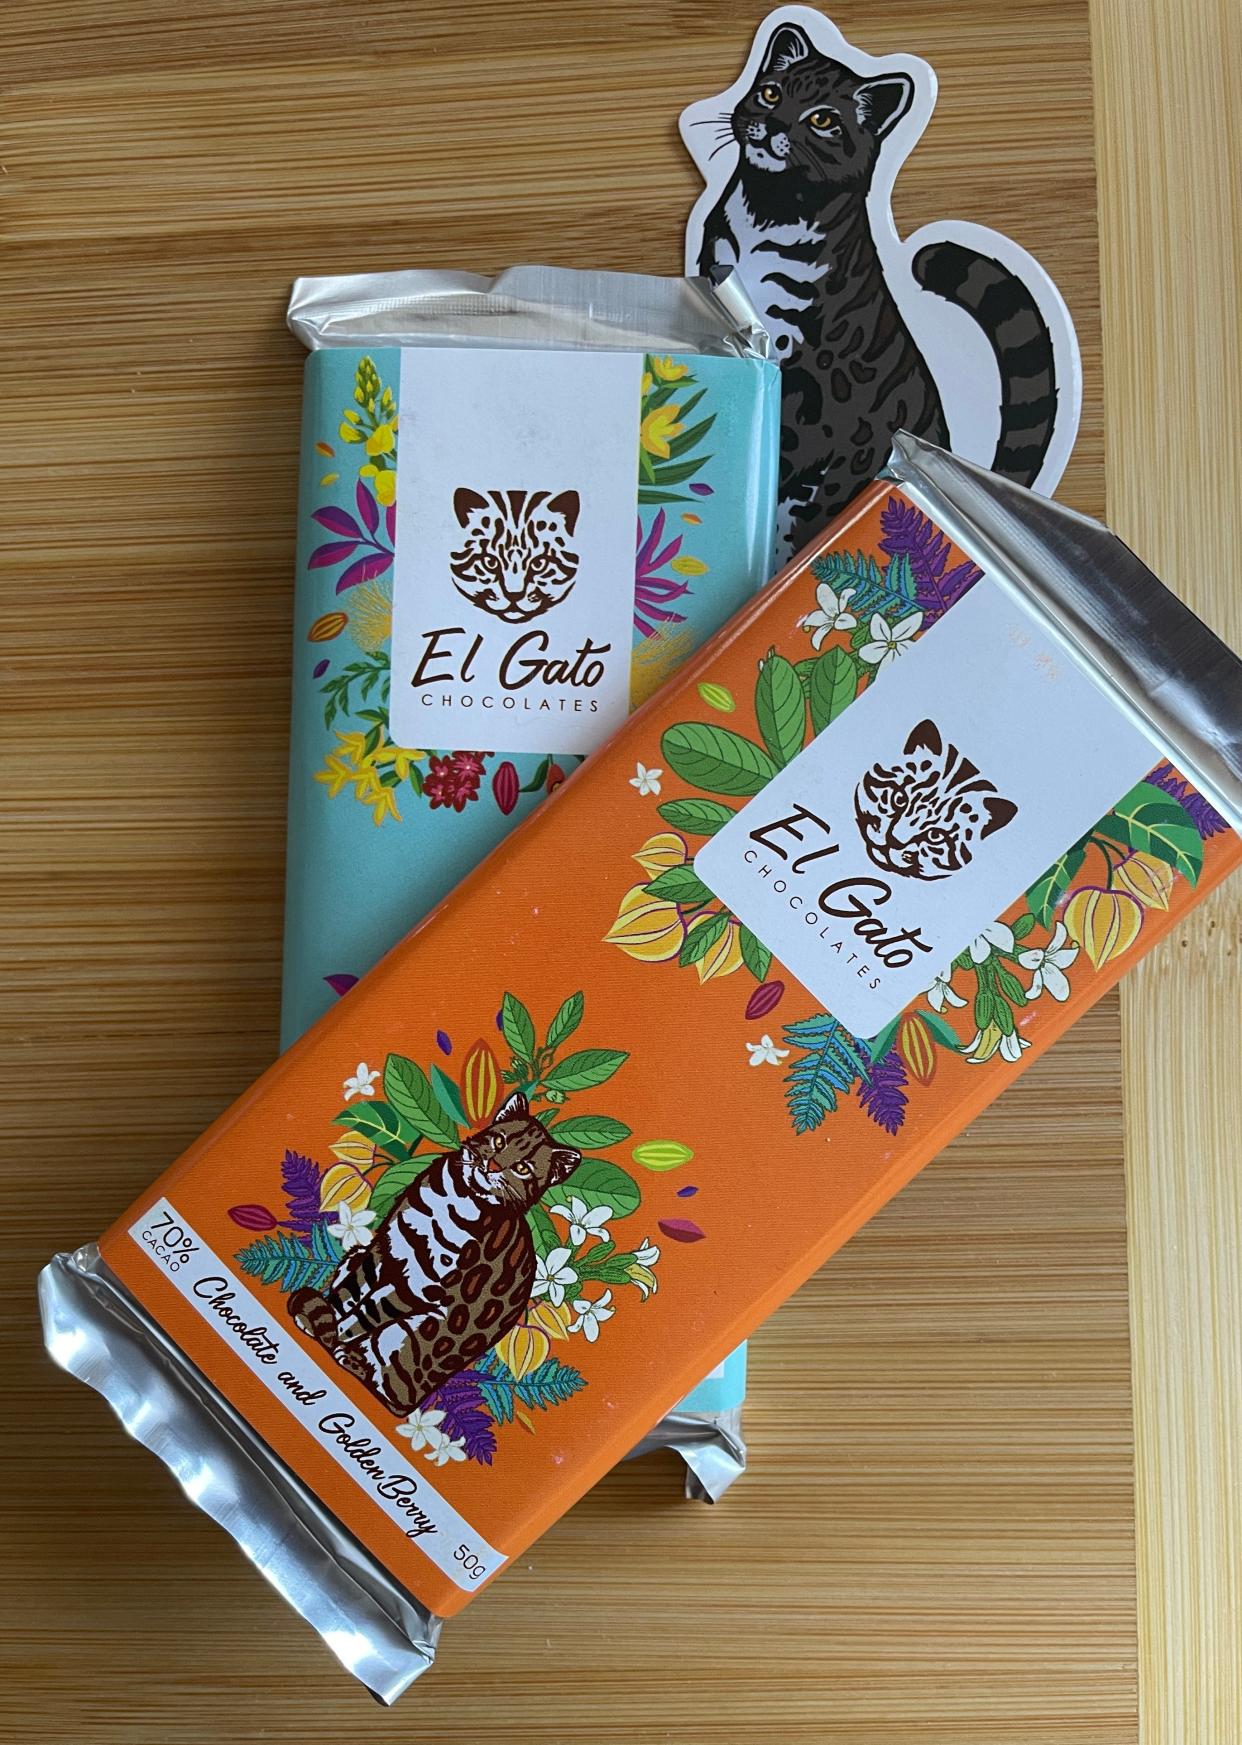 El Gato Chocolate bars are made with cacao from Peru and feature endangered wildcats on their labels. The company donates 10% of its profits to organizations working to protect wildcats.